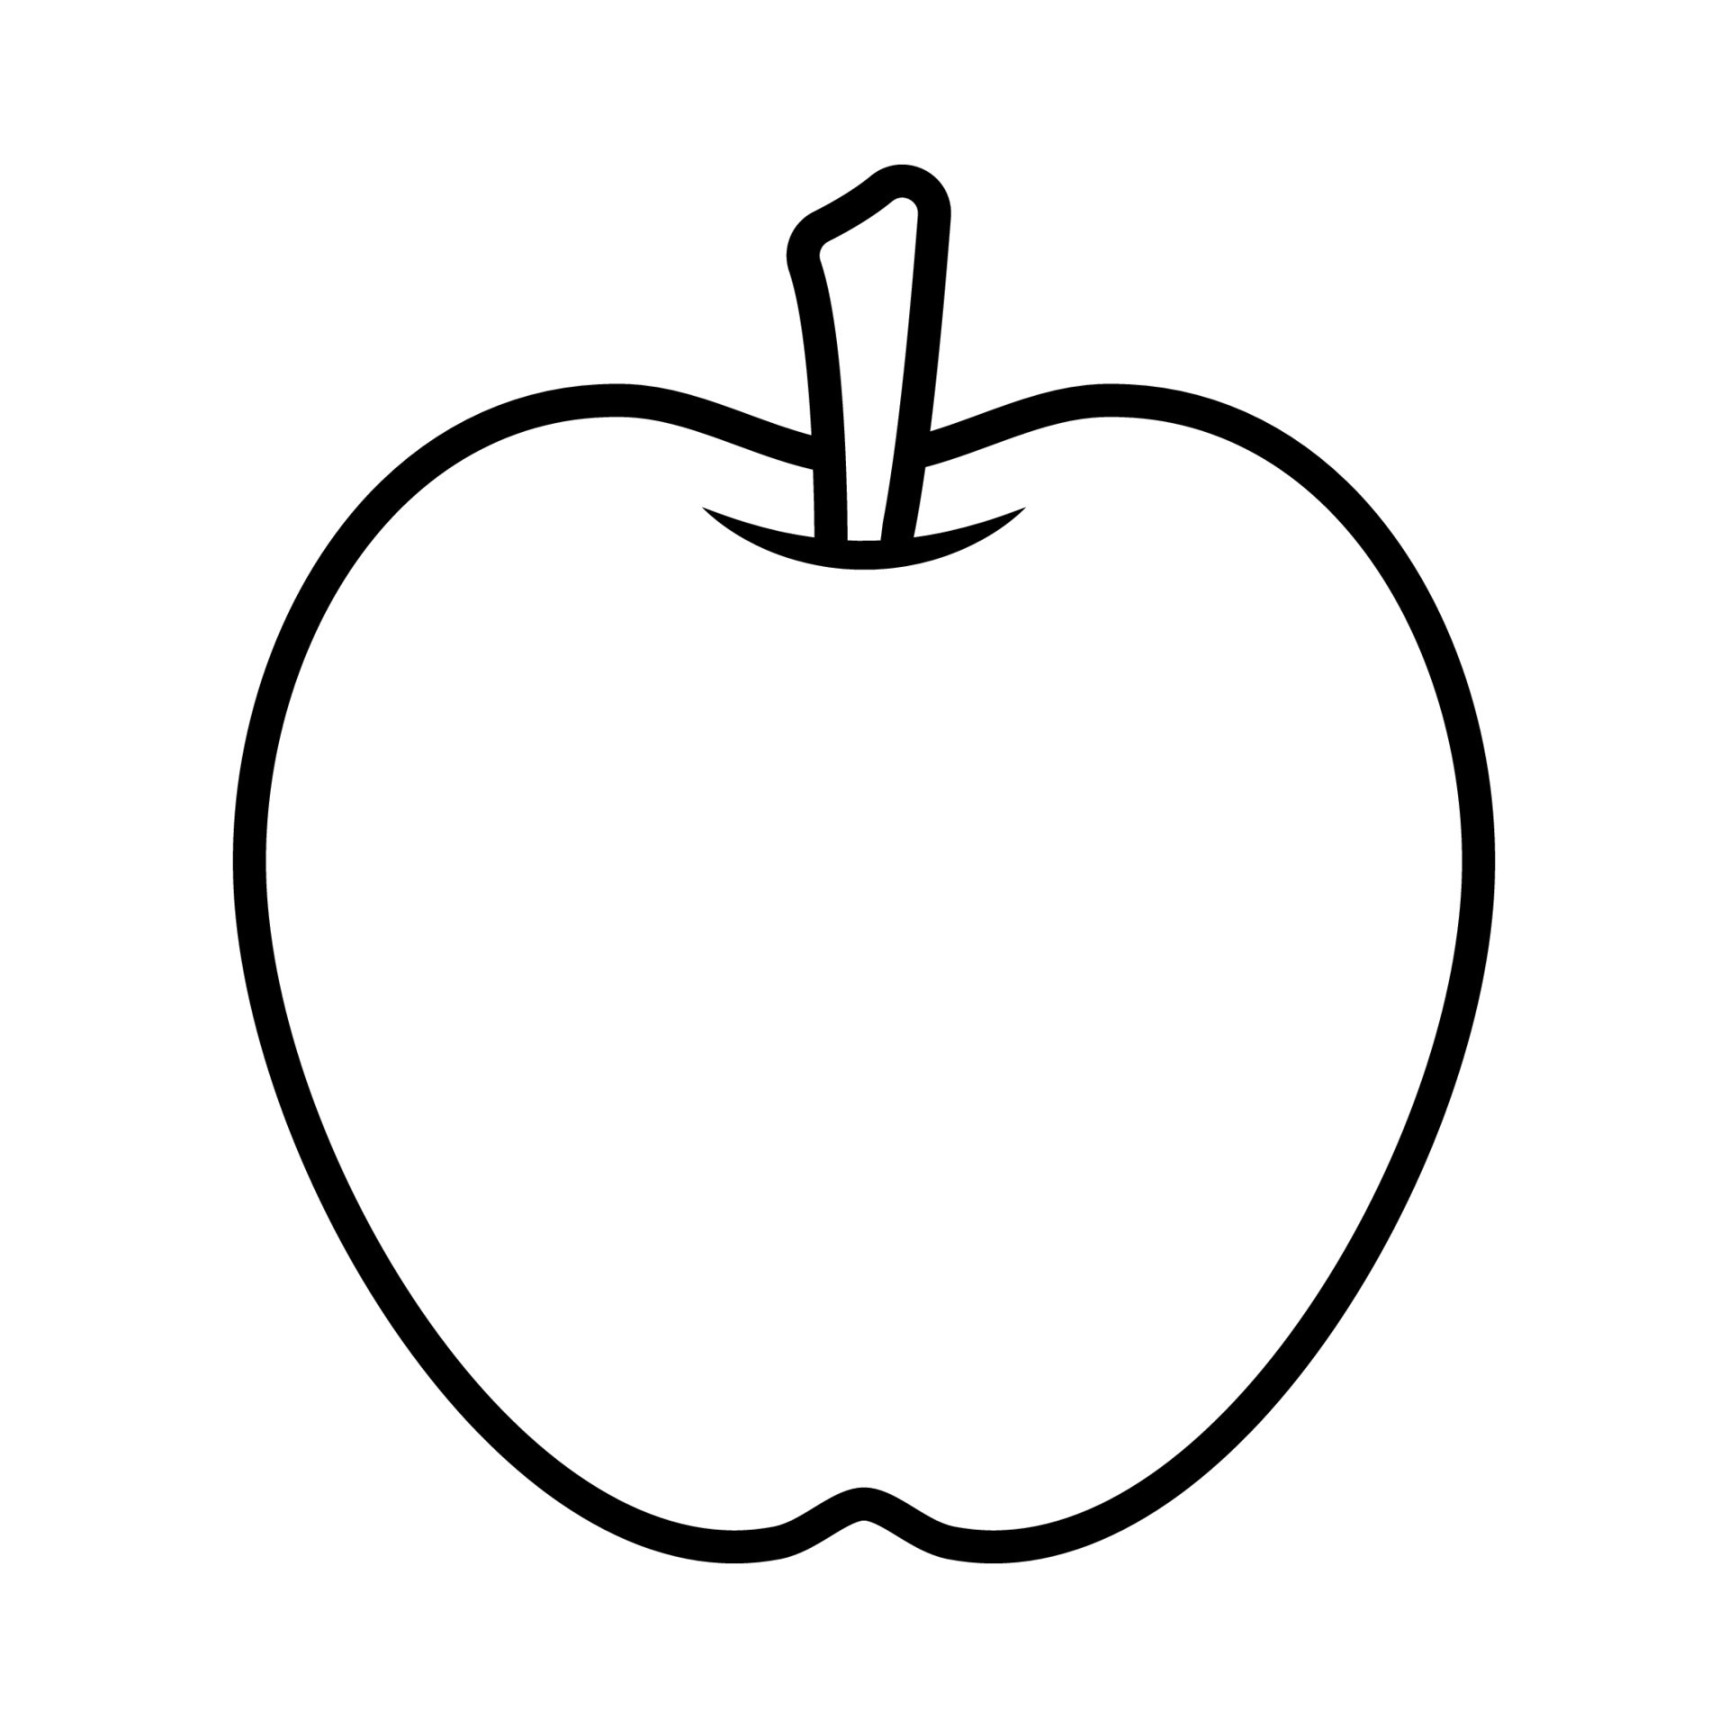 Apple Coloring Page Vector Illustration Image on White Background